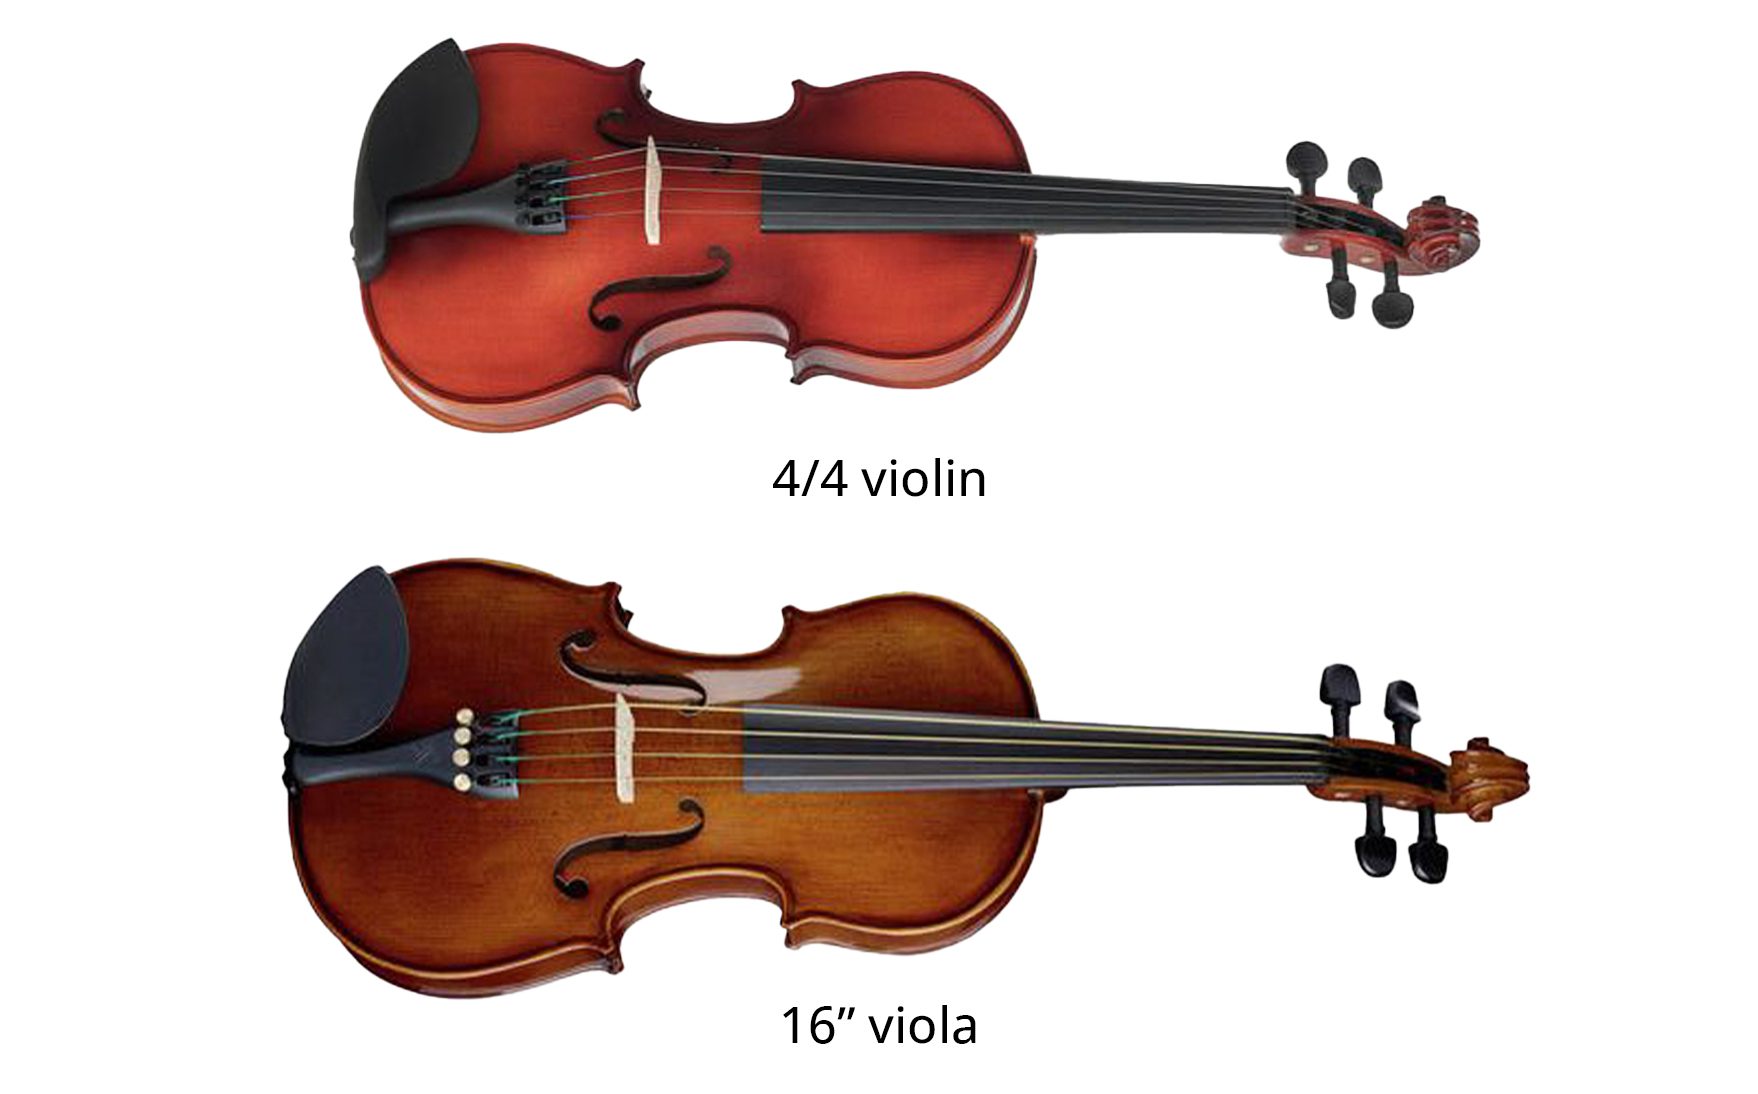 Differences between violin and viola